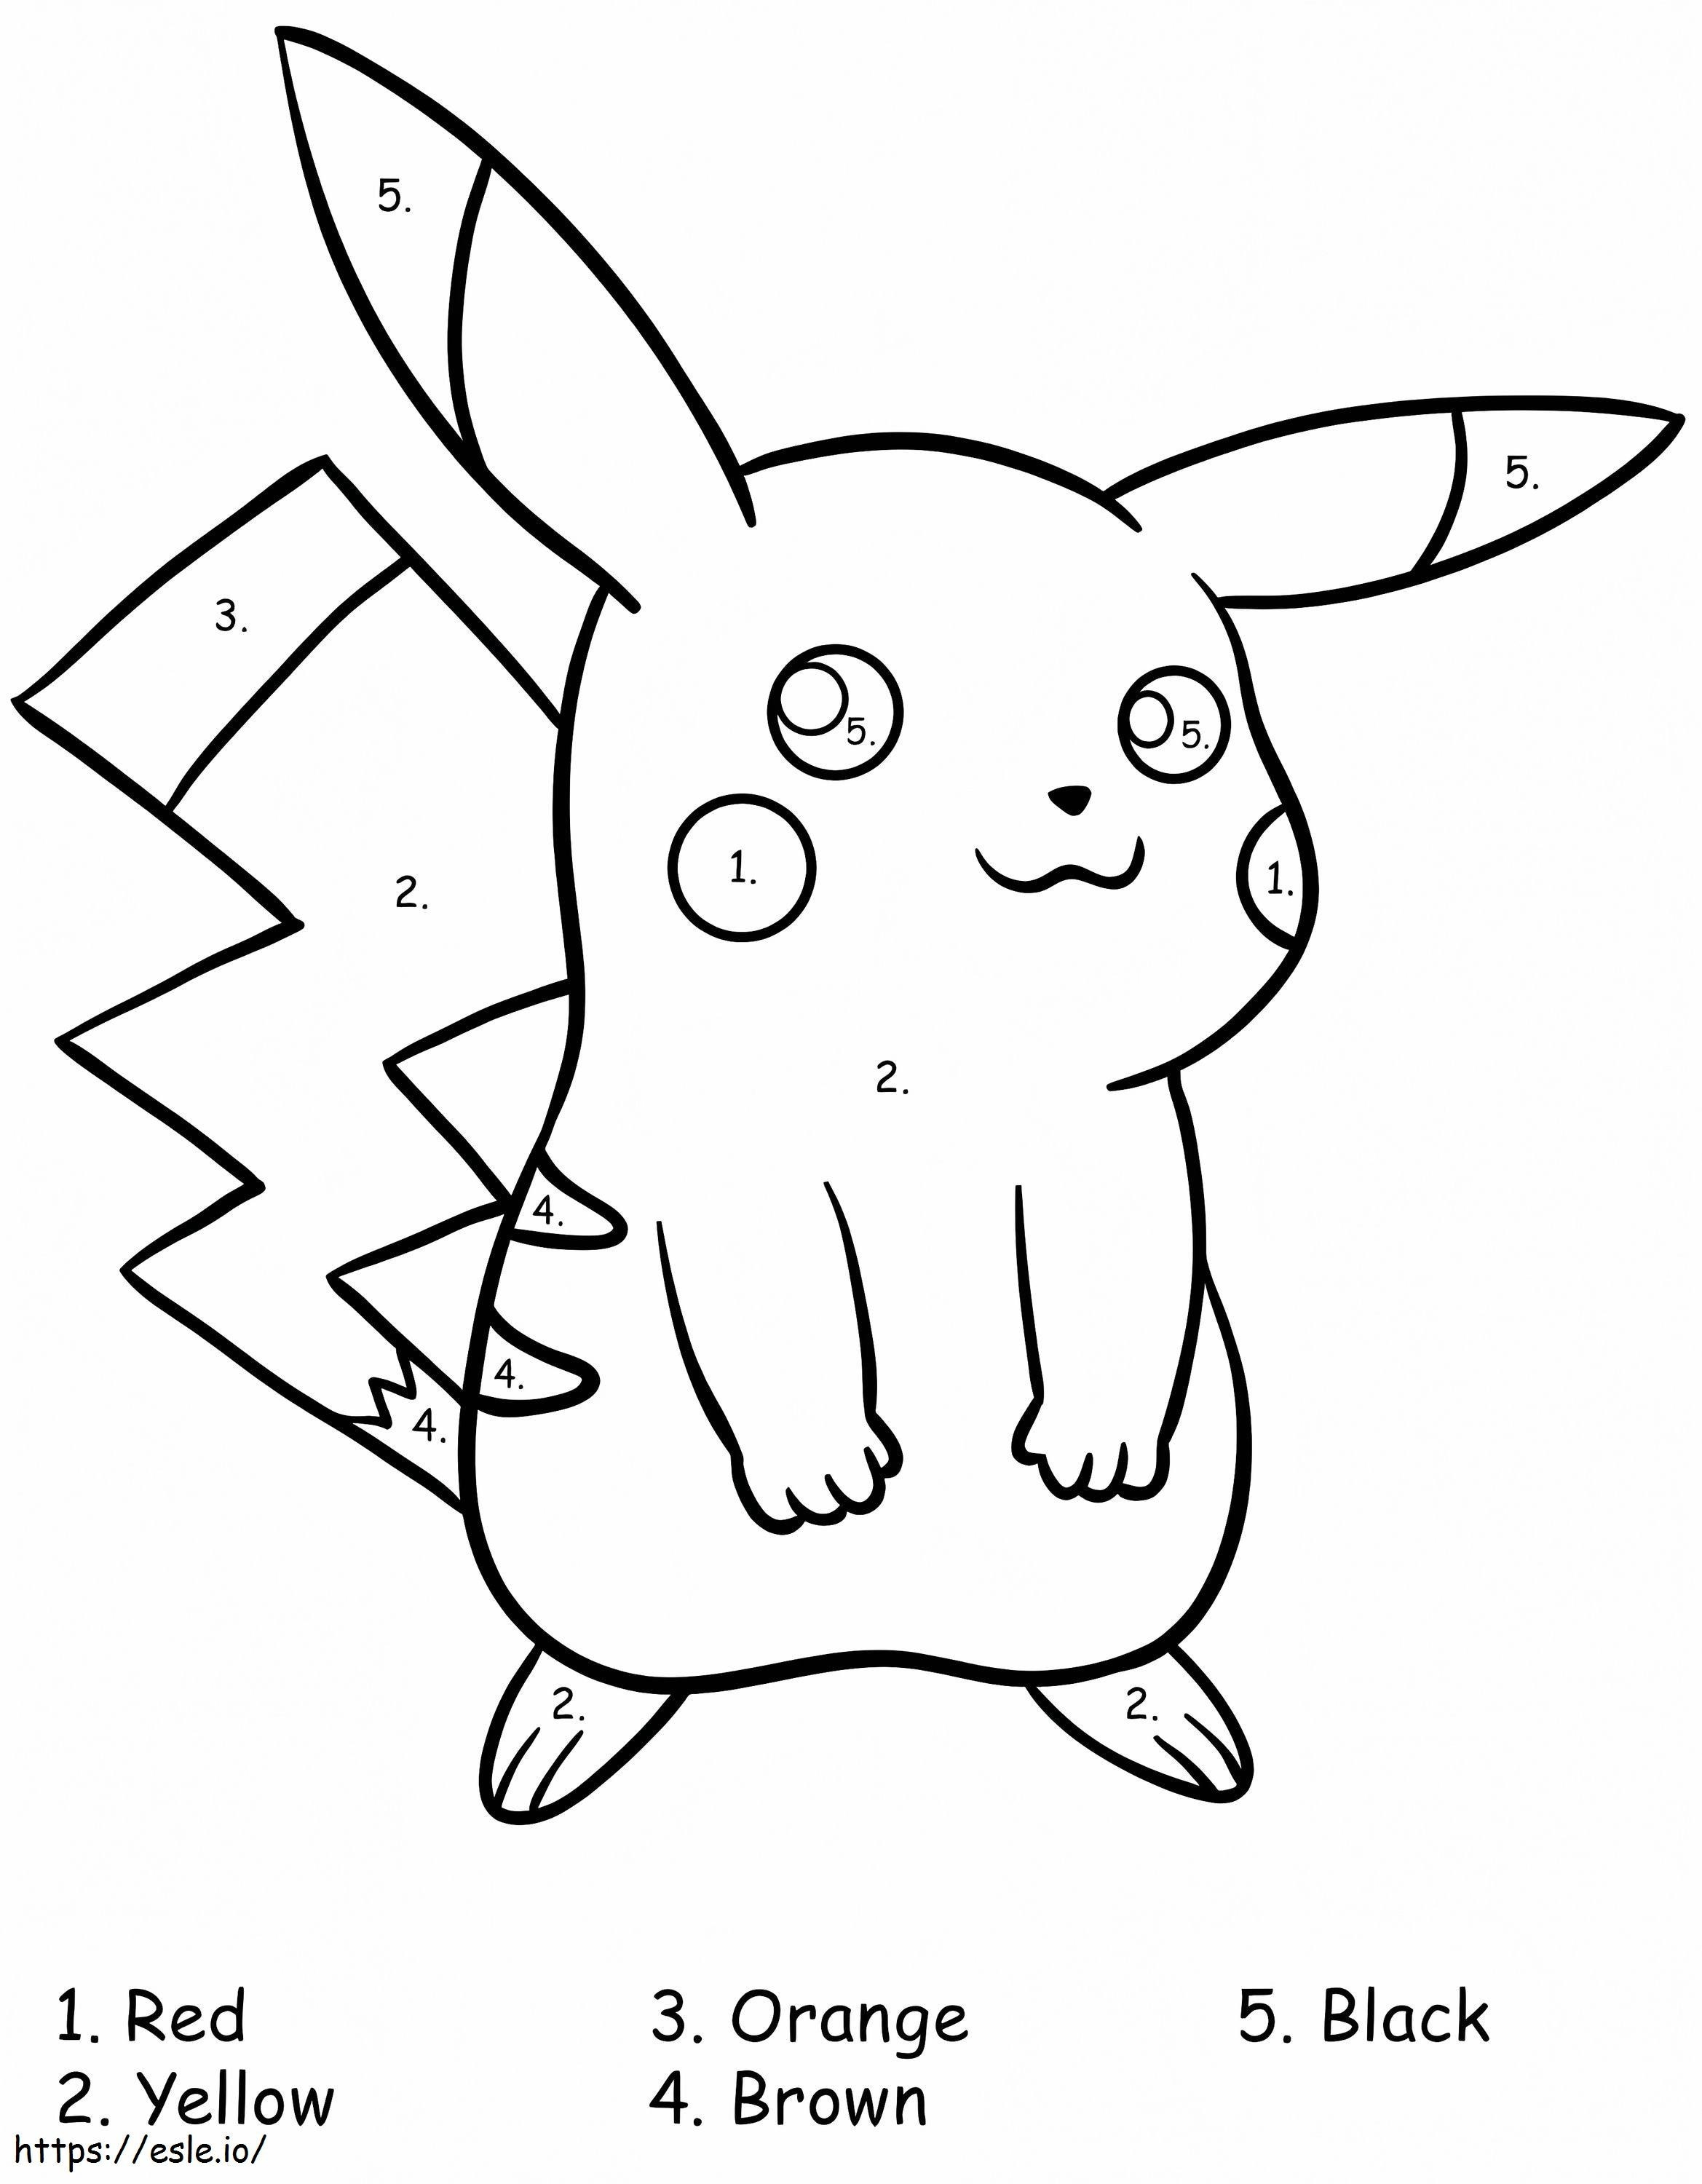 Pikachu Pokemon Color By Number coloring page